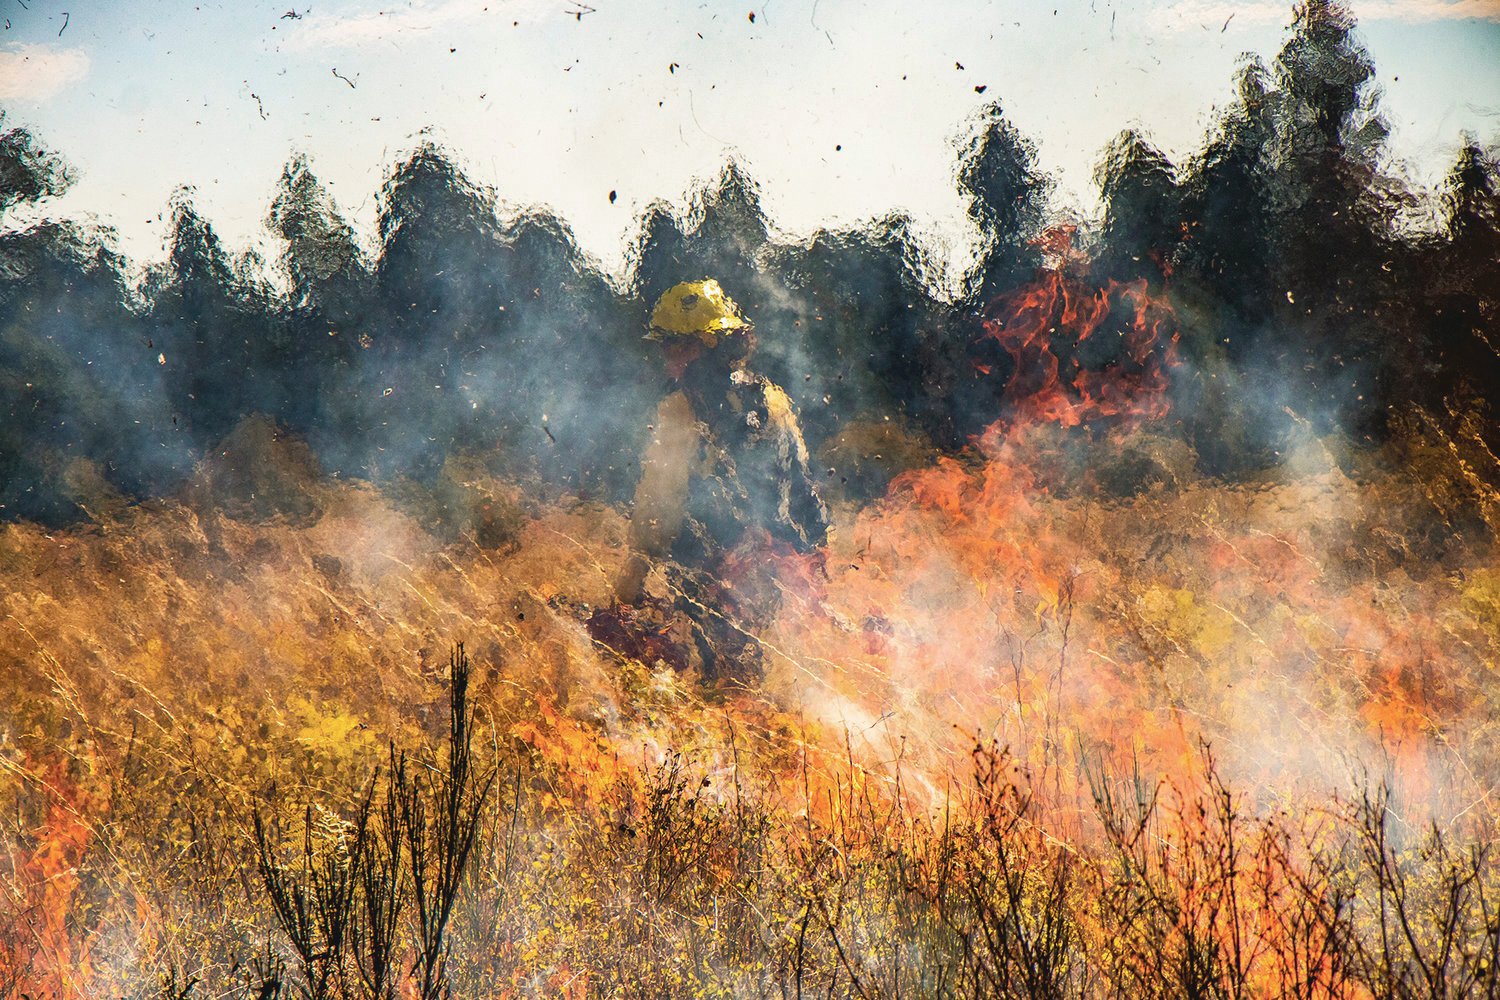 A Department of Natural Resource crew member walks behind flames during an ecological burn prescribed by the Center for Natural Lands Management, Thursday morning in the Scatter Creek Wildlife Area near Grand Mound.